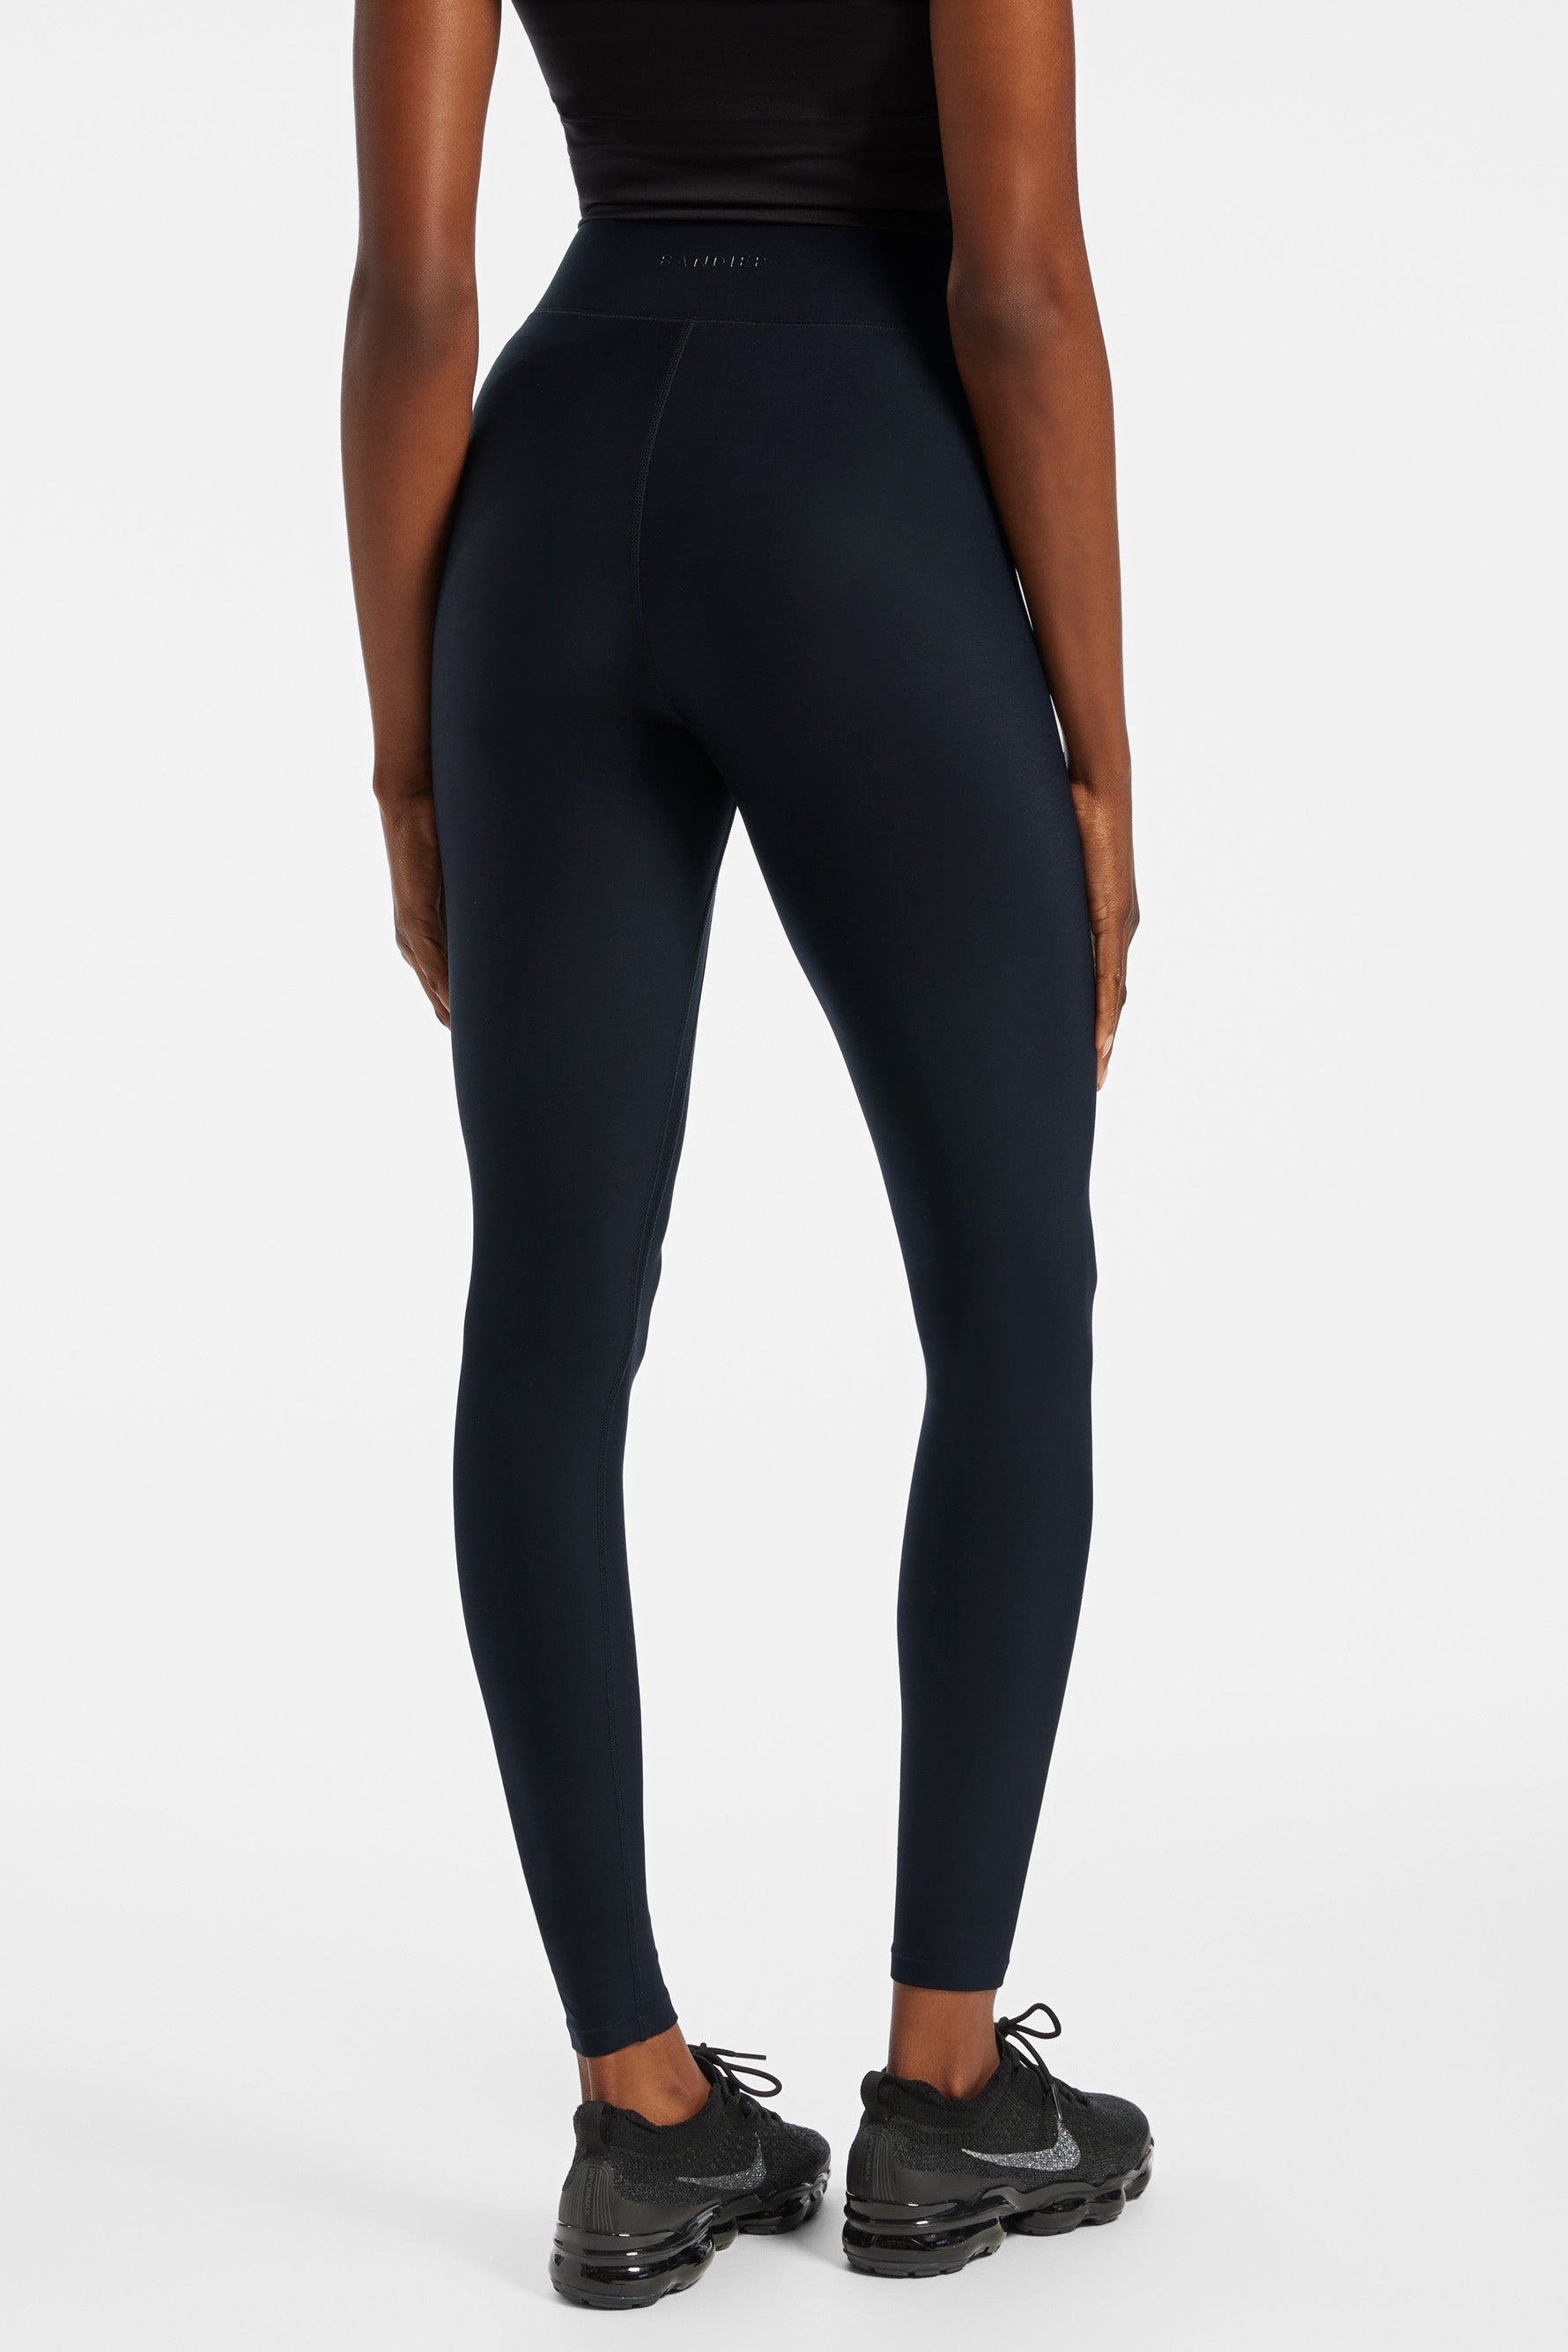 Nike Pro hyperwarm brushed tights - size 2X left!  Leggings are not pants,  Pants for women, Colorful leggings